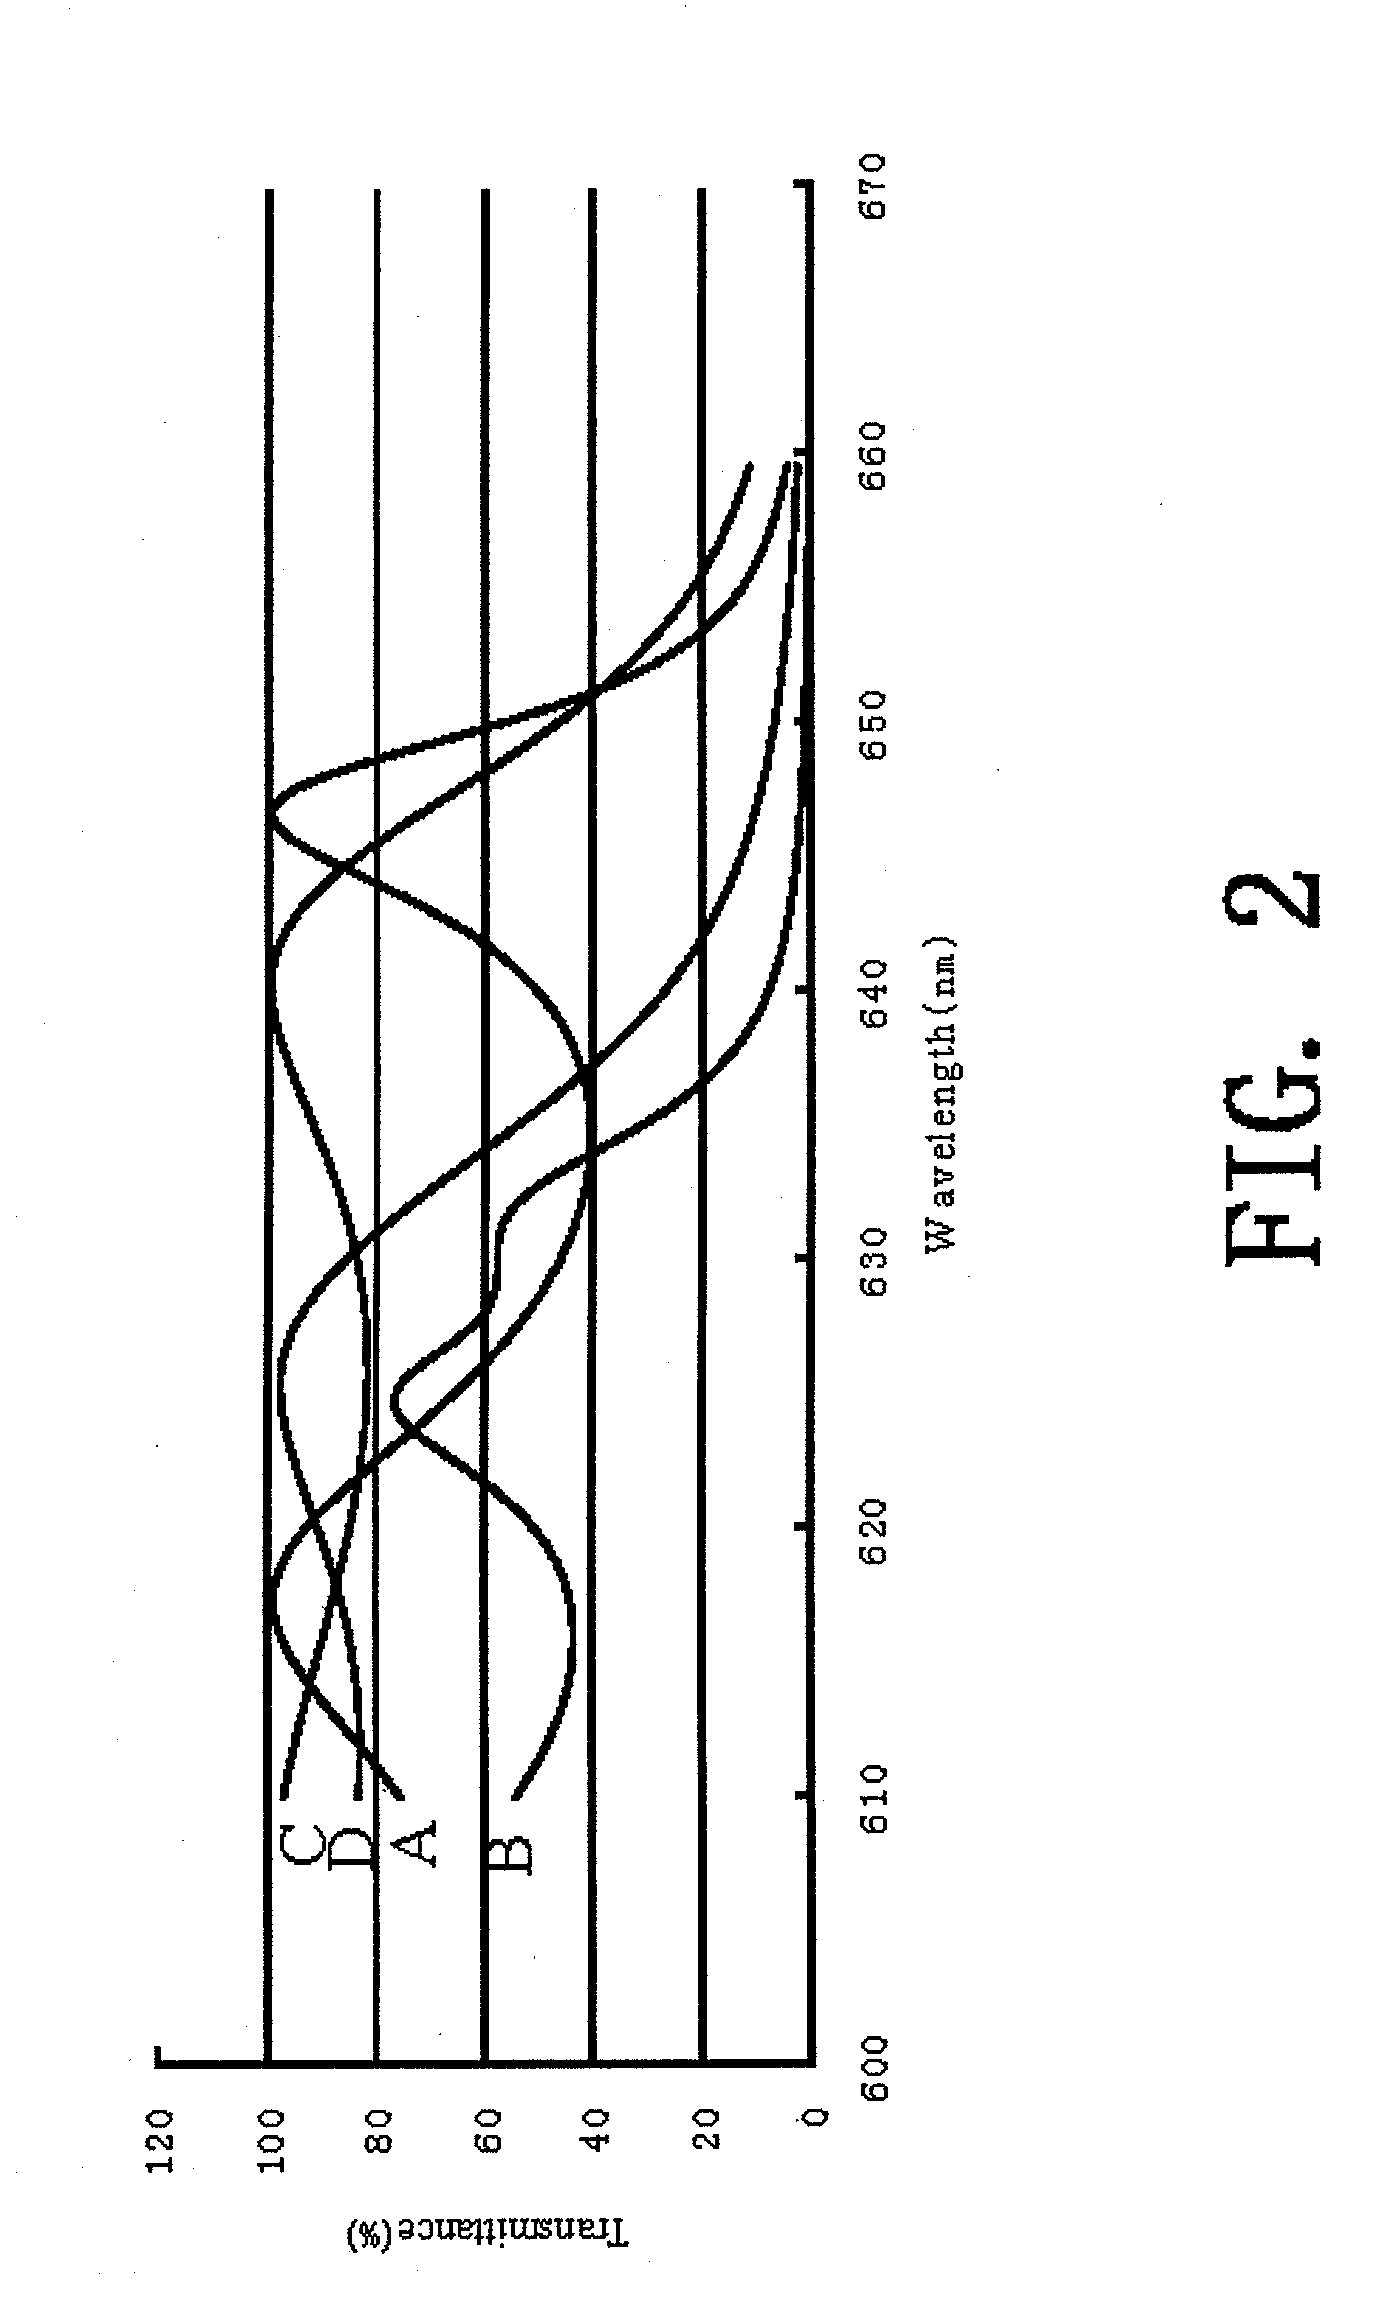 Optical multilayer thin-film system